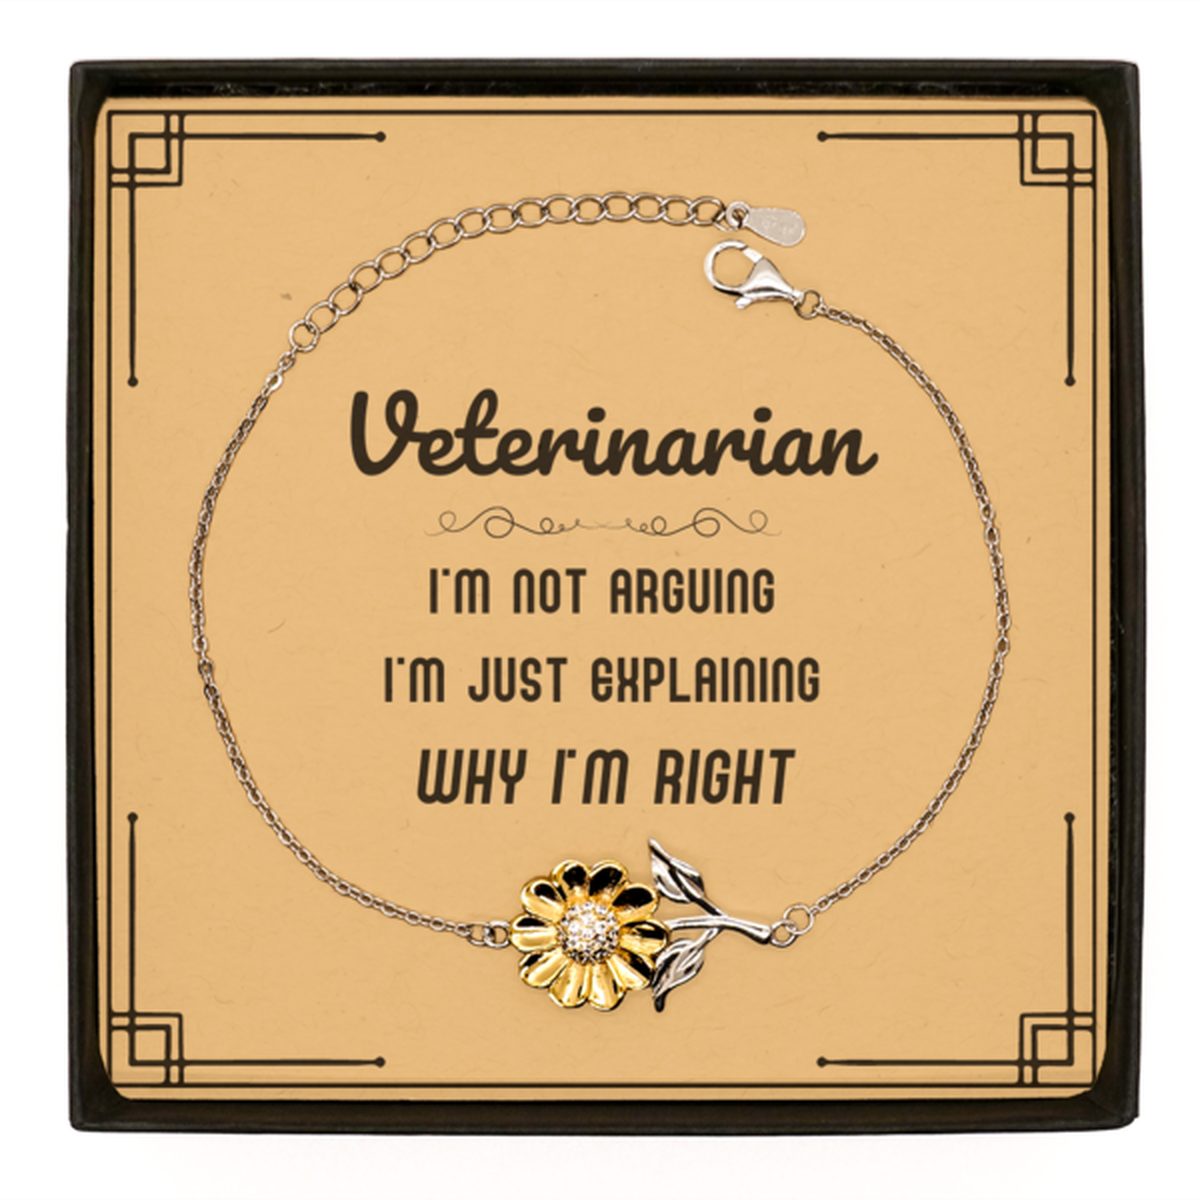 Veterinarian I'm not Arguing. I'm Just Explaining Why I'm RIGHT Sunflower Bracelet, Funny Saying Quote Veterinarian Gifts For Veterinarian Message Card Graduation Birthday Christmas Gifts for Men Women Coworker